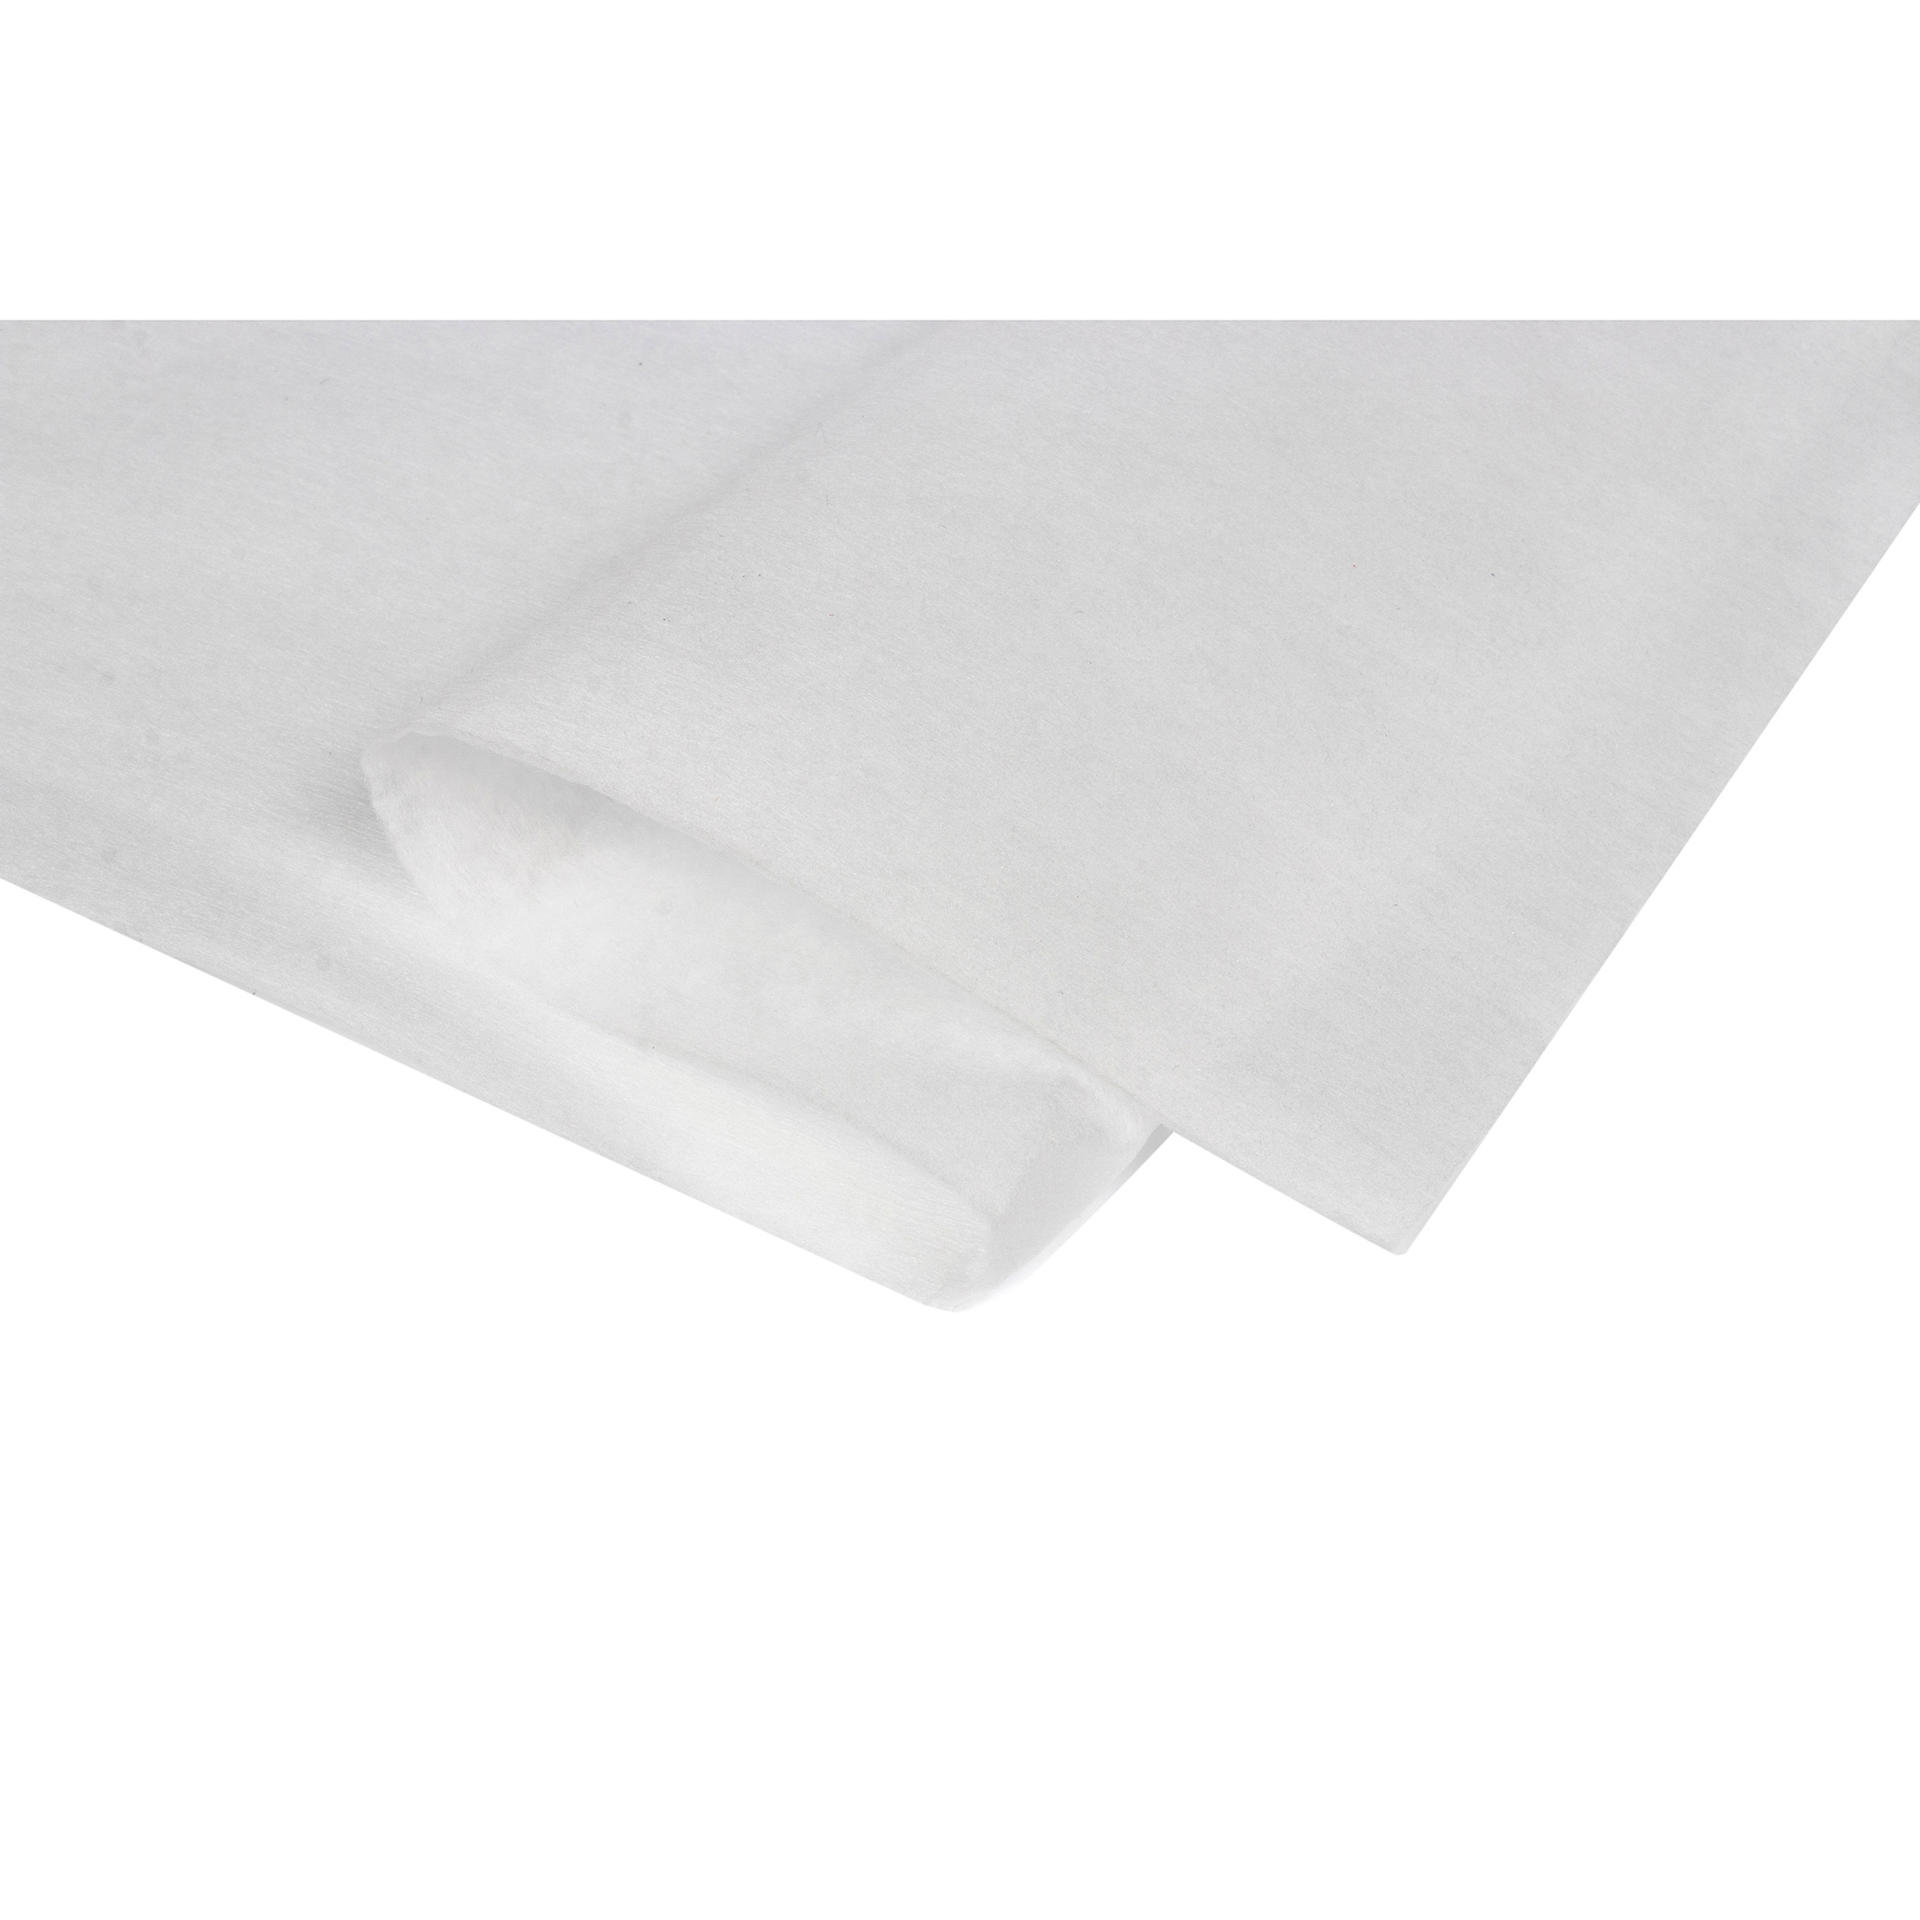 Eco-friendly black/white meltblown nonwoven fabric for medical fabric